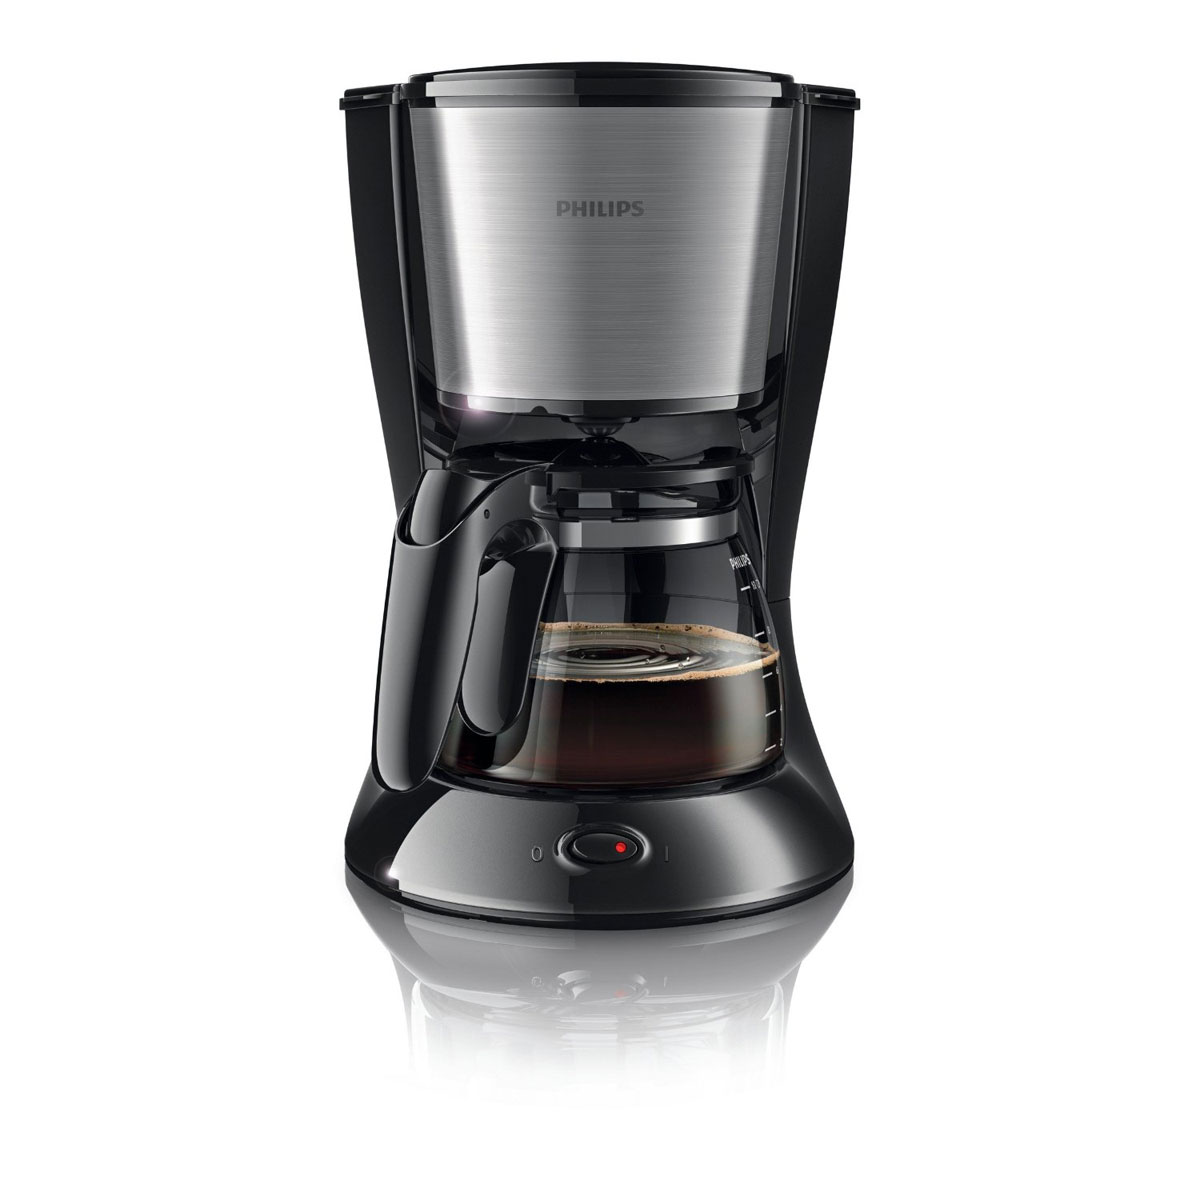 Cafetiera Philips Daily Collection HD7457/20, V W, 1.2 l, Negru/Inox